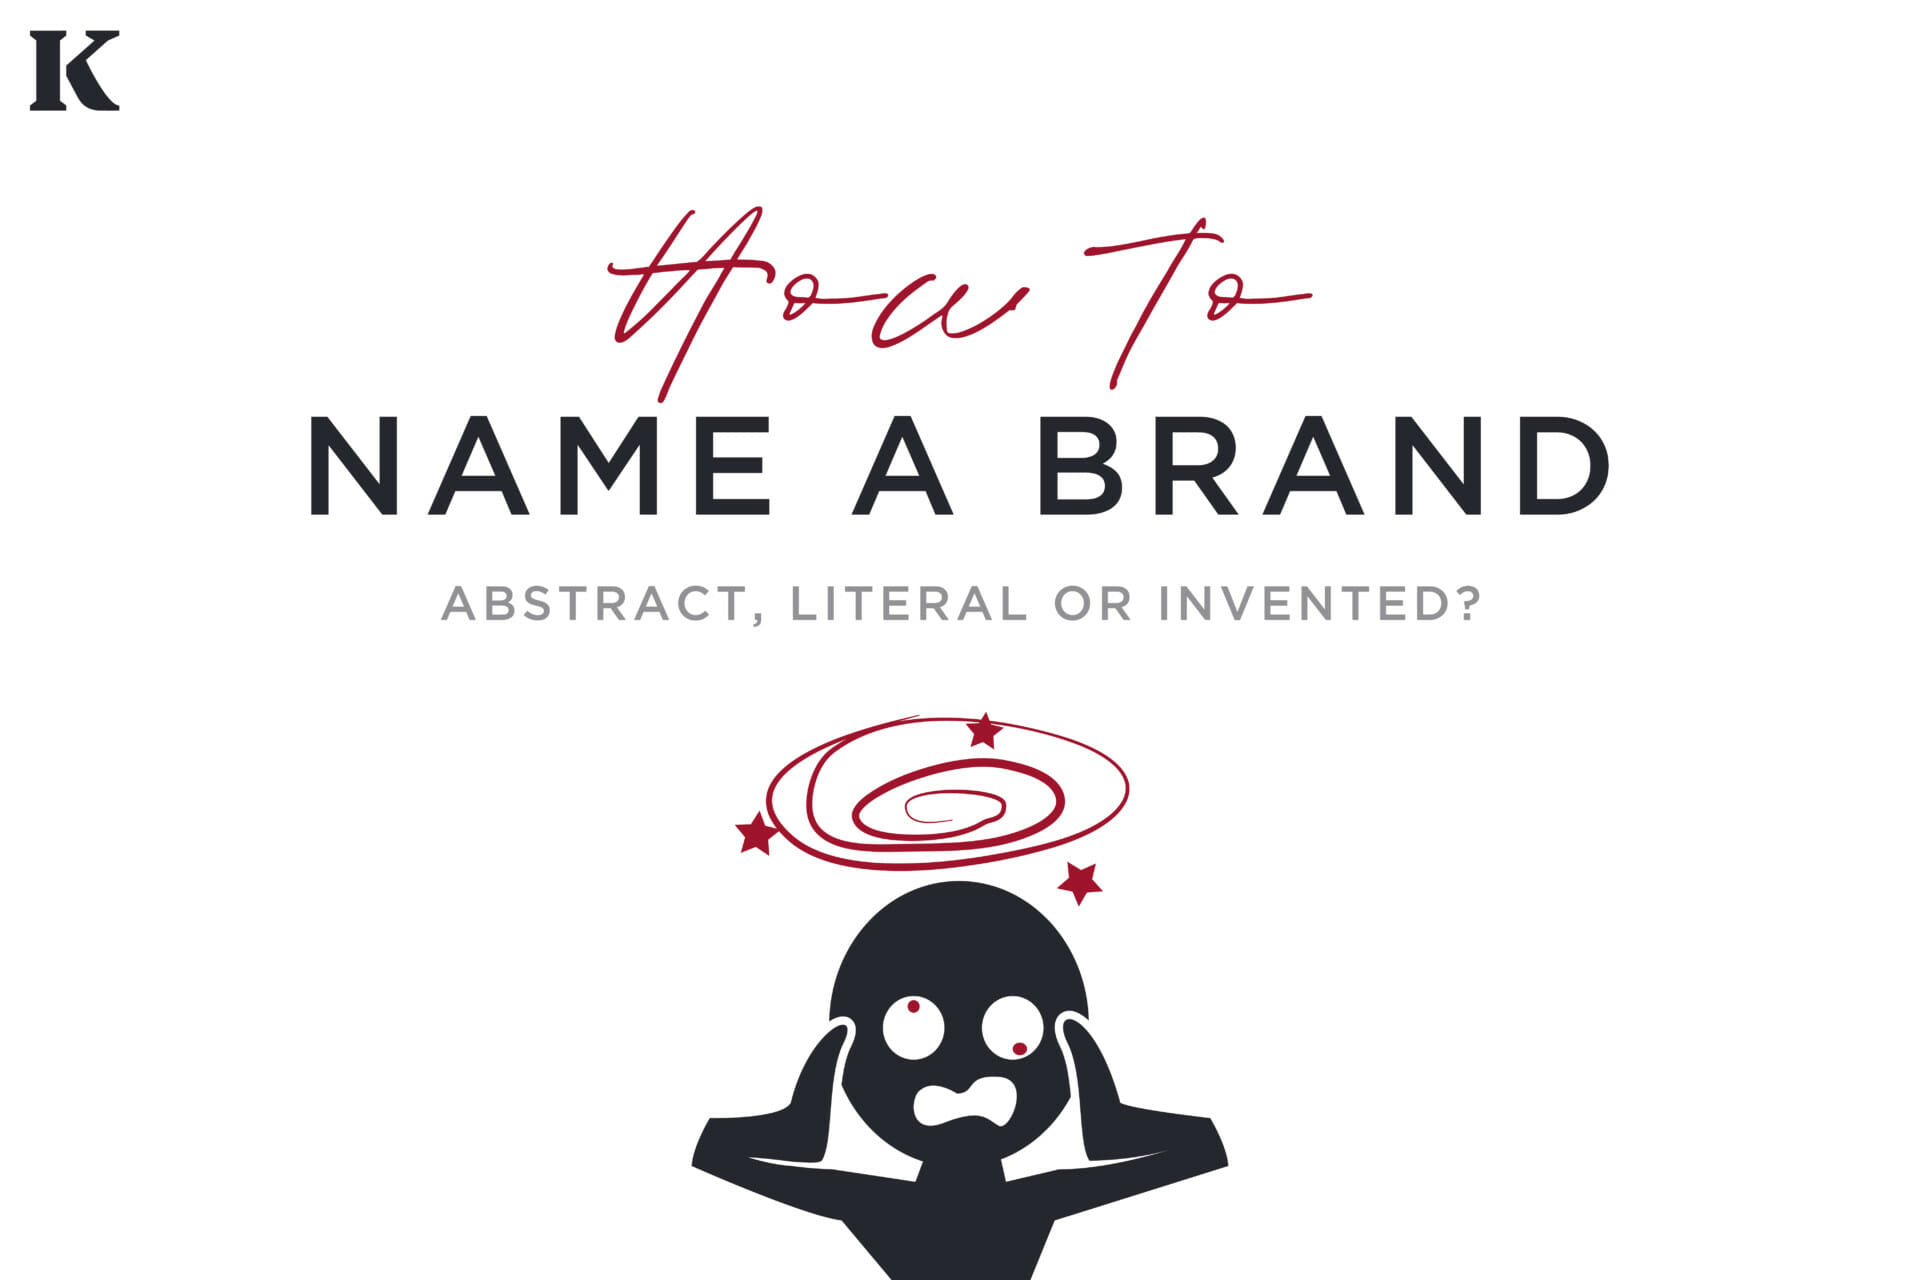 How to name a brand